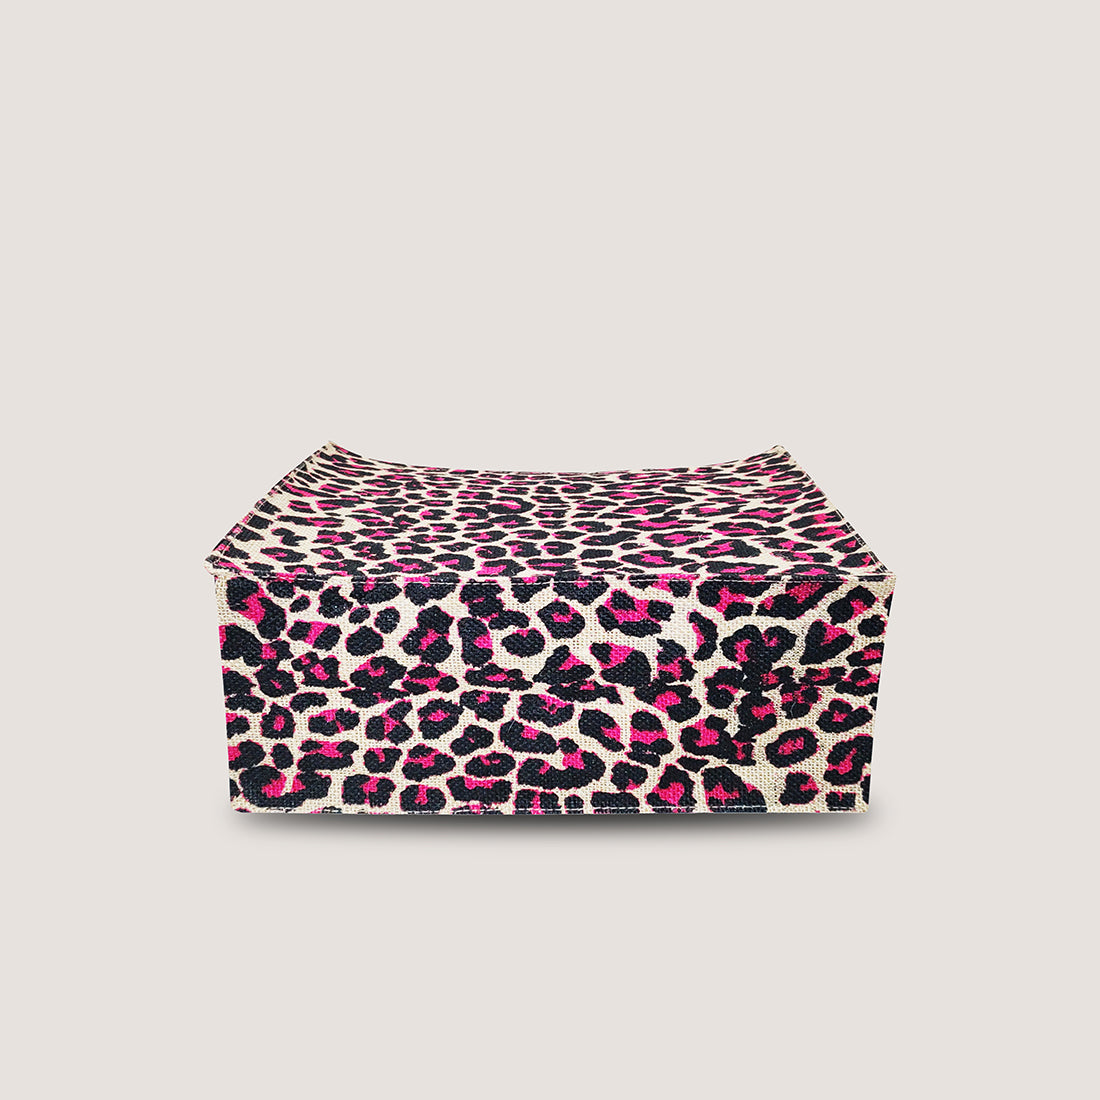 EARTHBAGS LEOPARD PRINTED LUNCH BAG WITH PADDED HANDLES